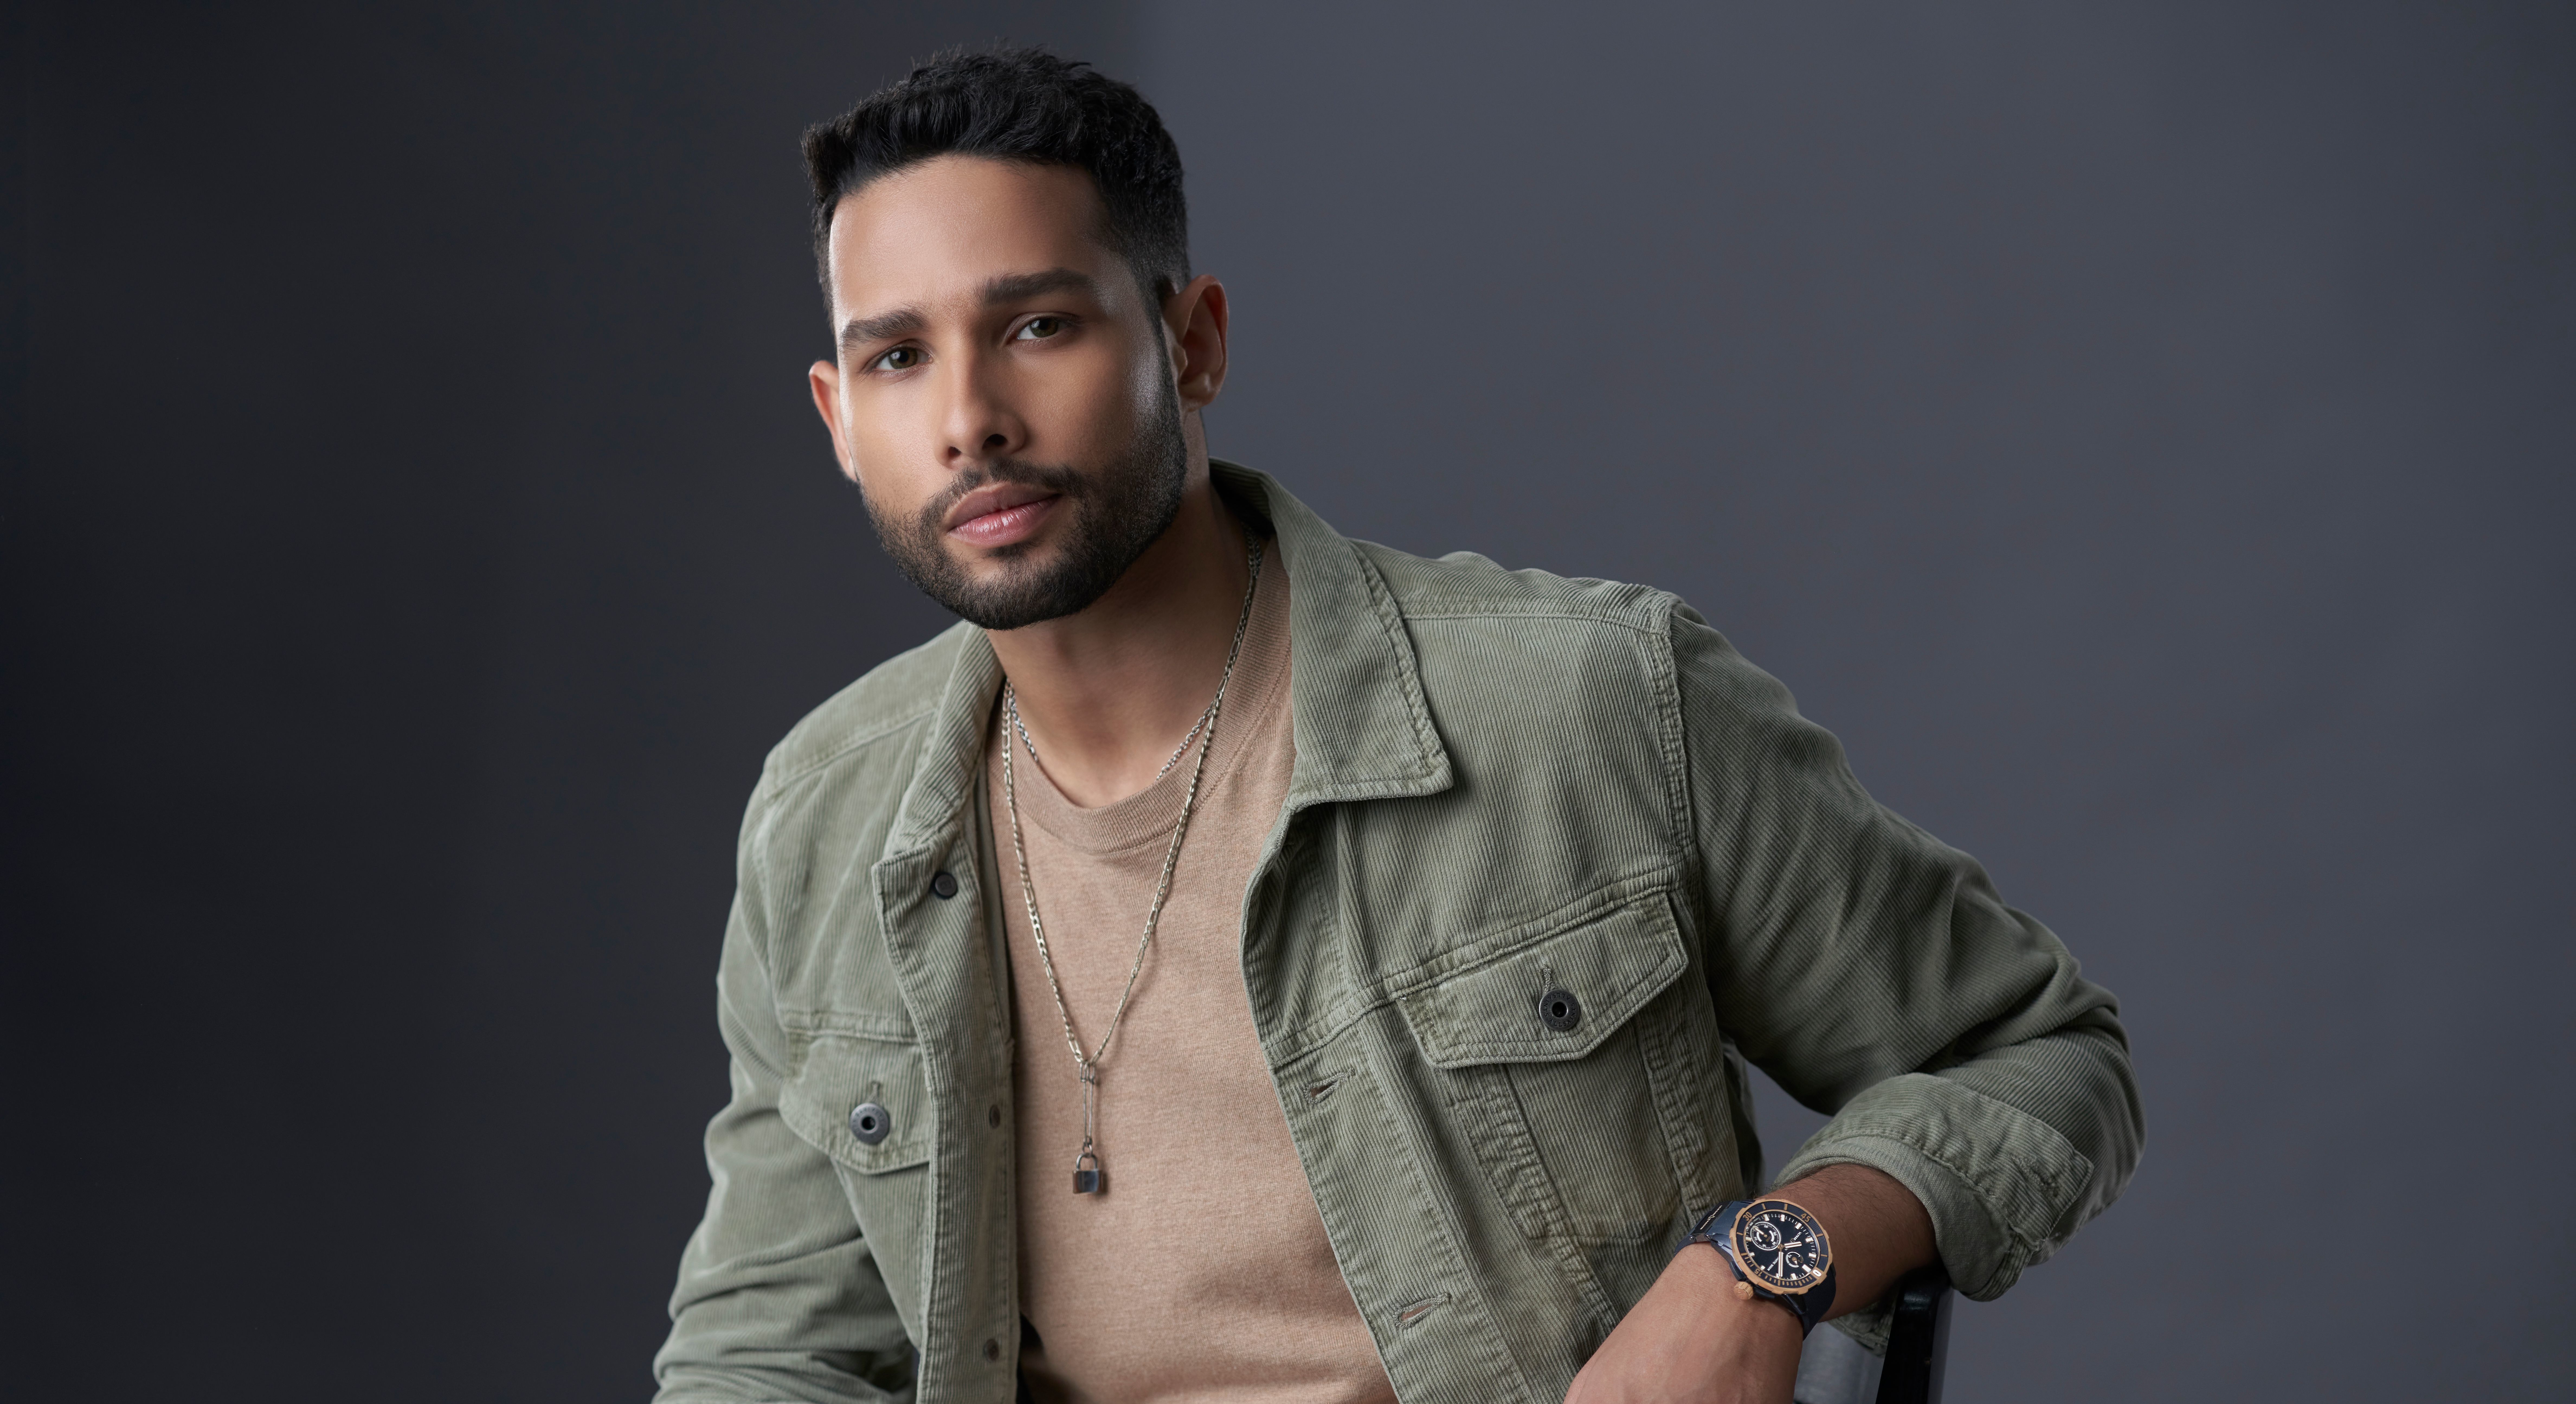 Two-timing with Siddhant Chaturvedi, Ulysse Nardin’s new brand ambassador